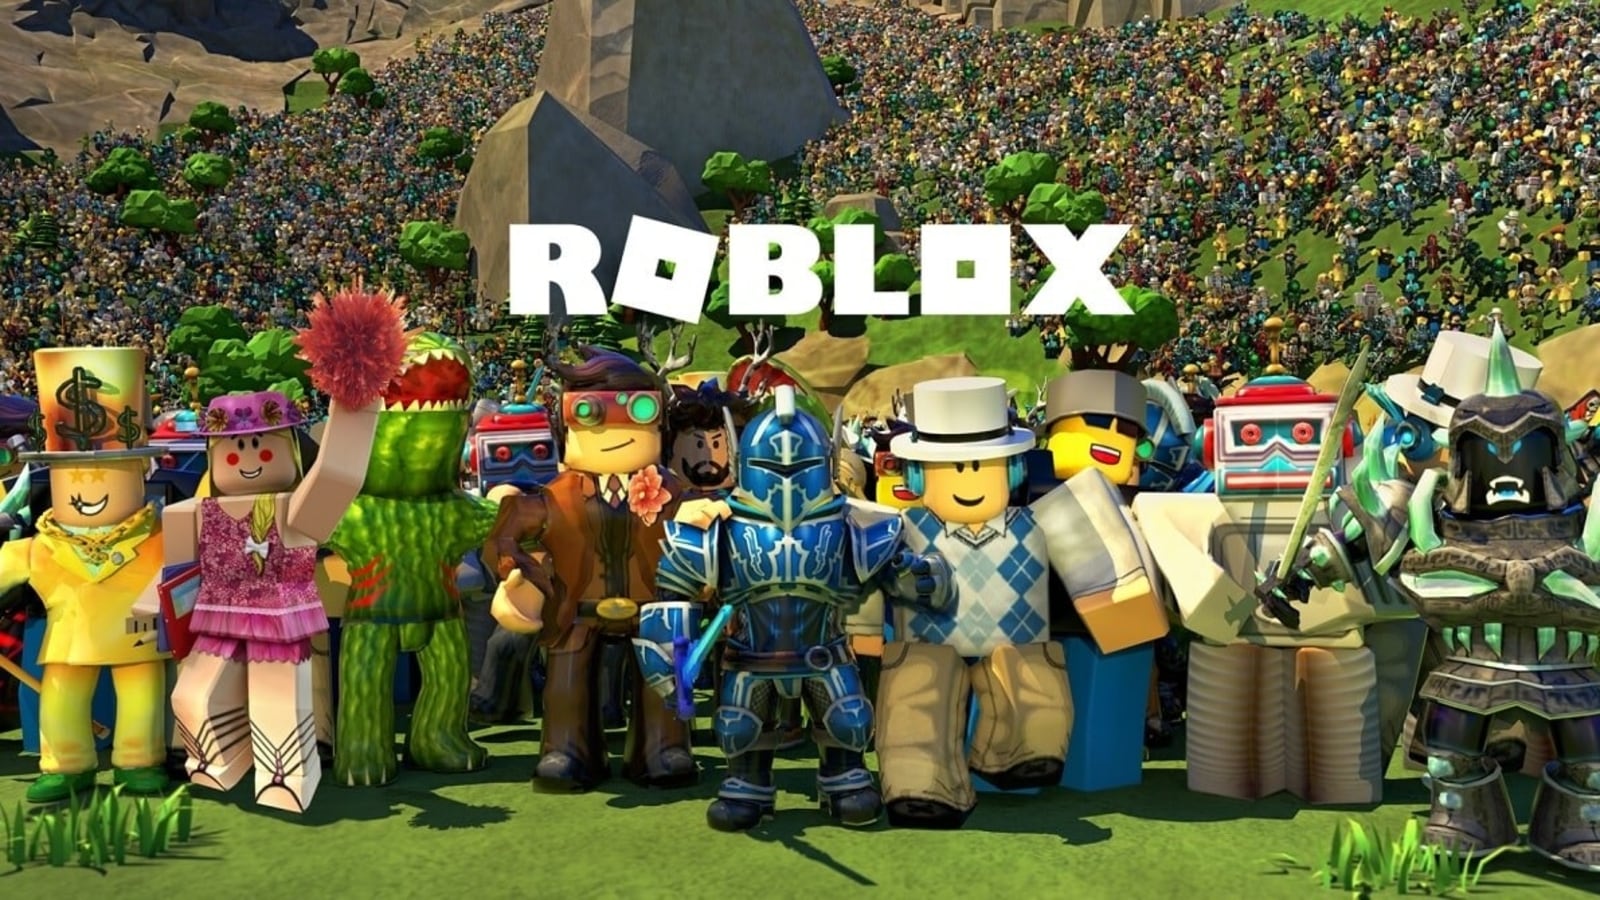 ROBLOX, Online Gaming and Being eSmart